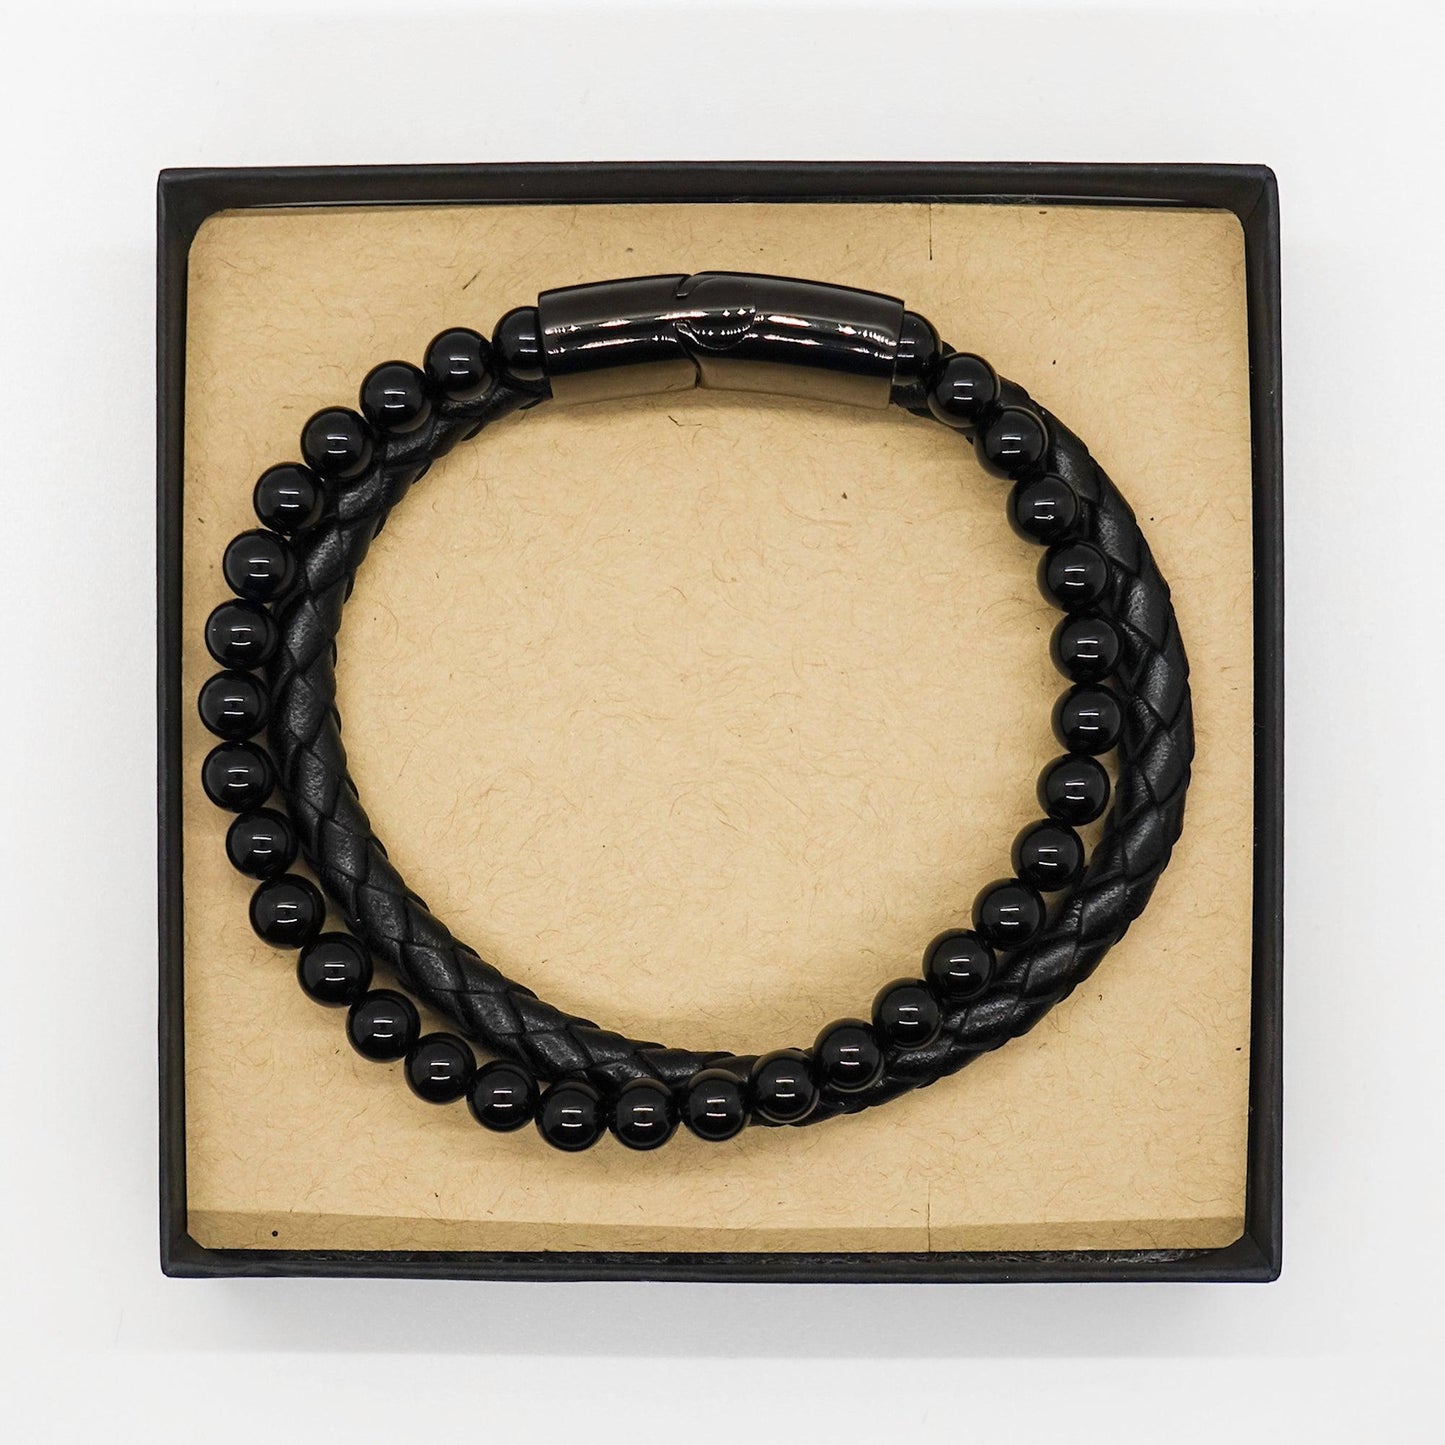 Childcare Worker Black Braided Stone Leather Bracelet - Thanks for being who you are - Birthday Christmas Jewelry Gifts Coworkers Colleague Boss - Mallard Moon Gift Shop